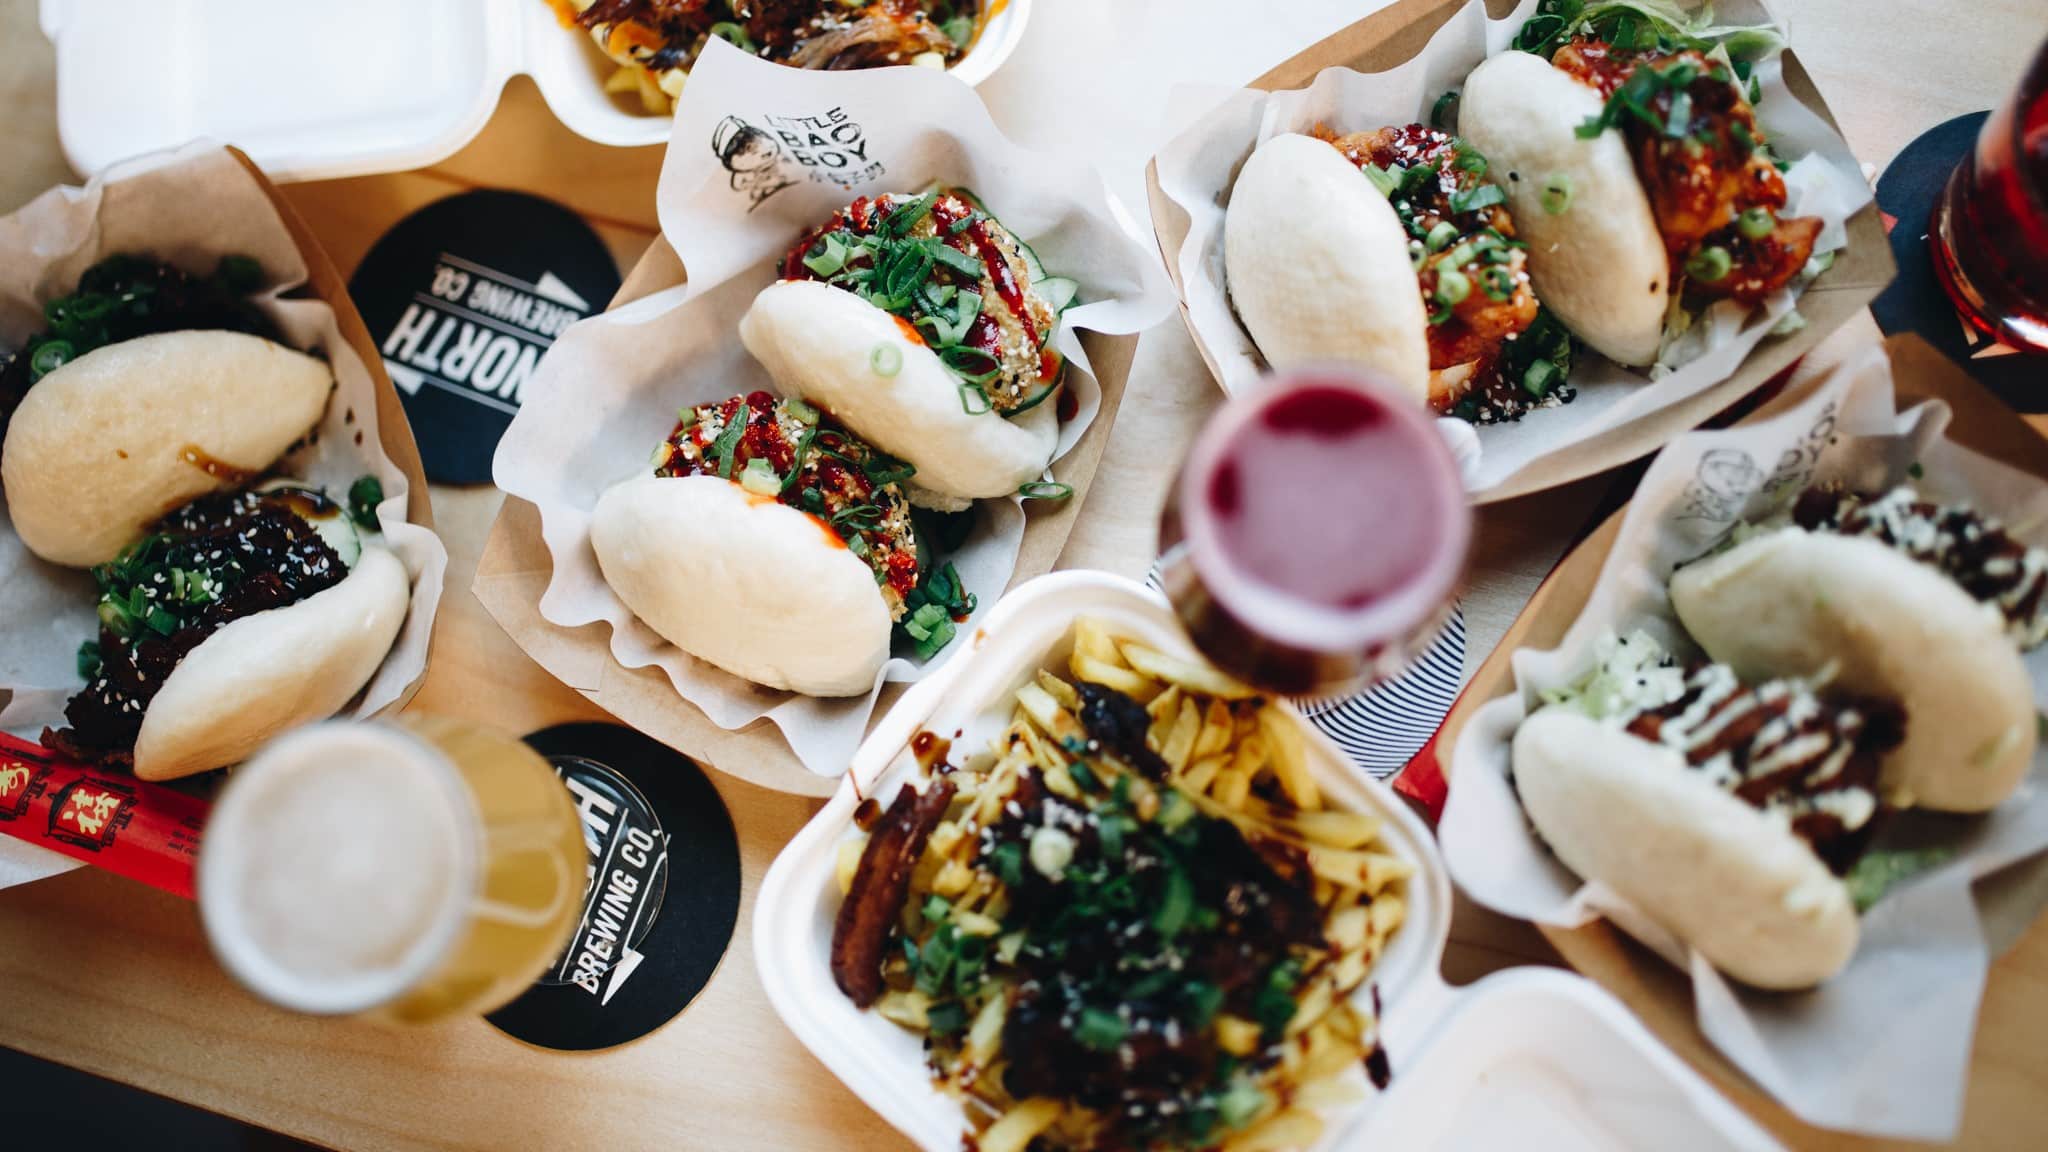 Bao buns from Little Bao Boy at North Brewing Co